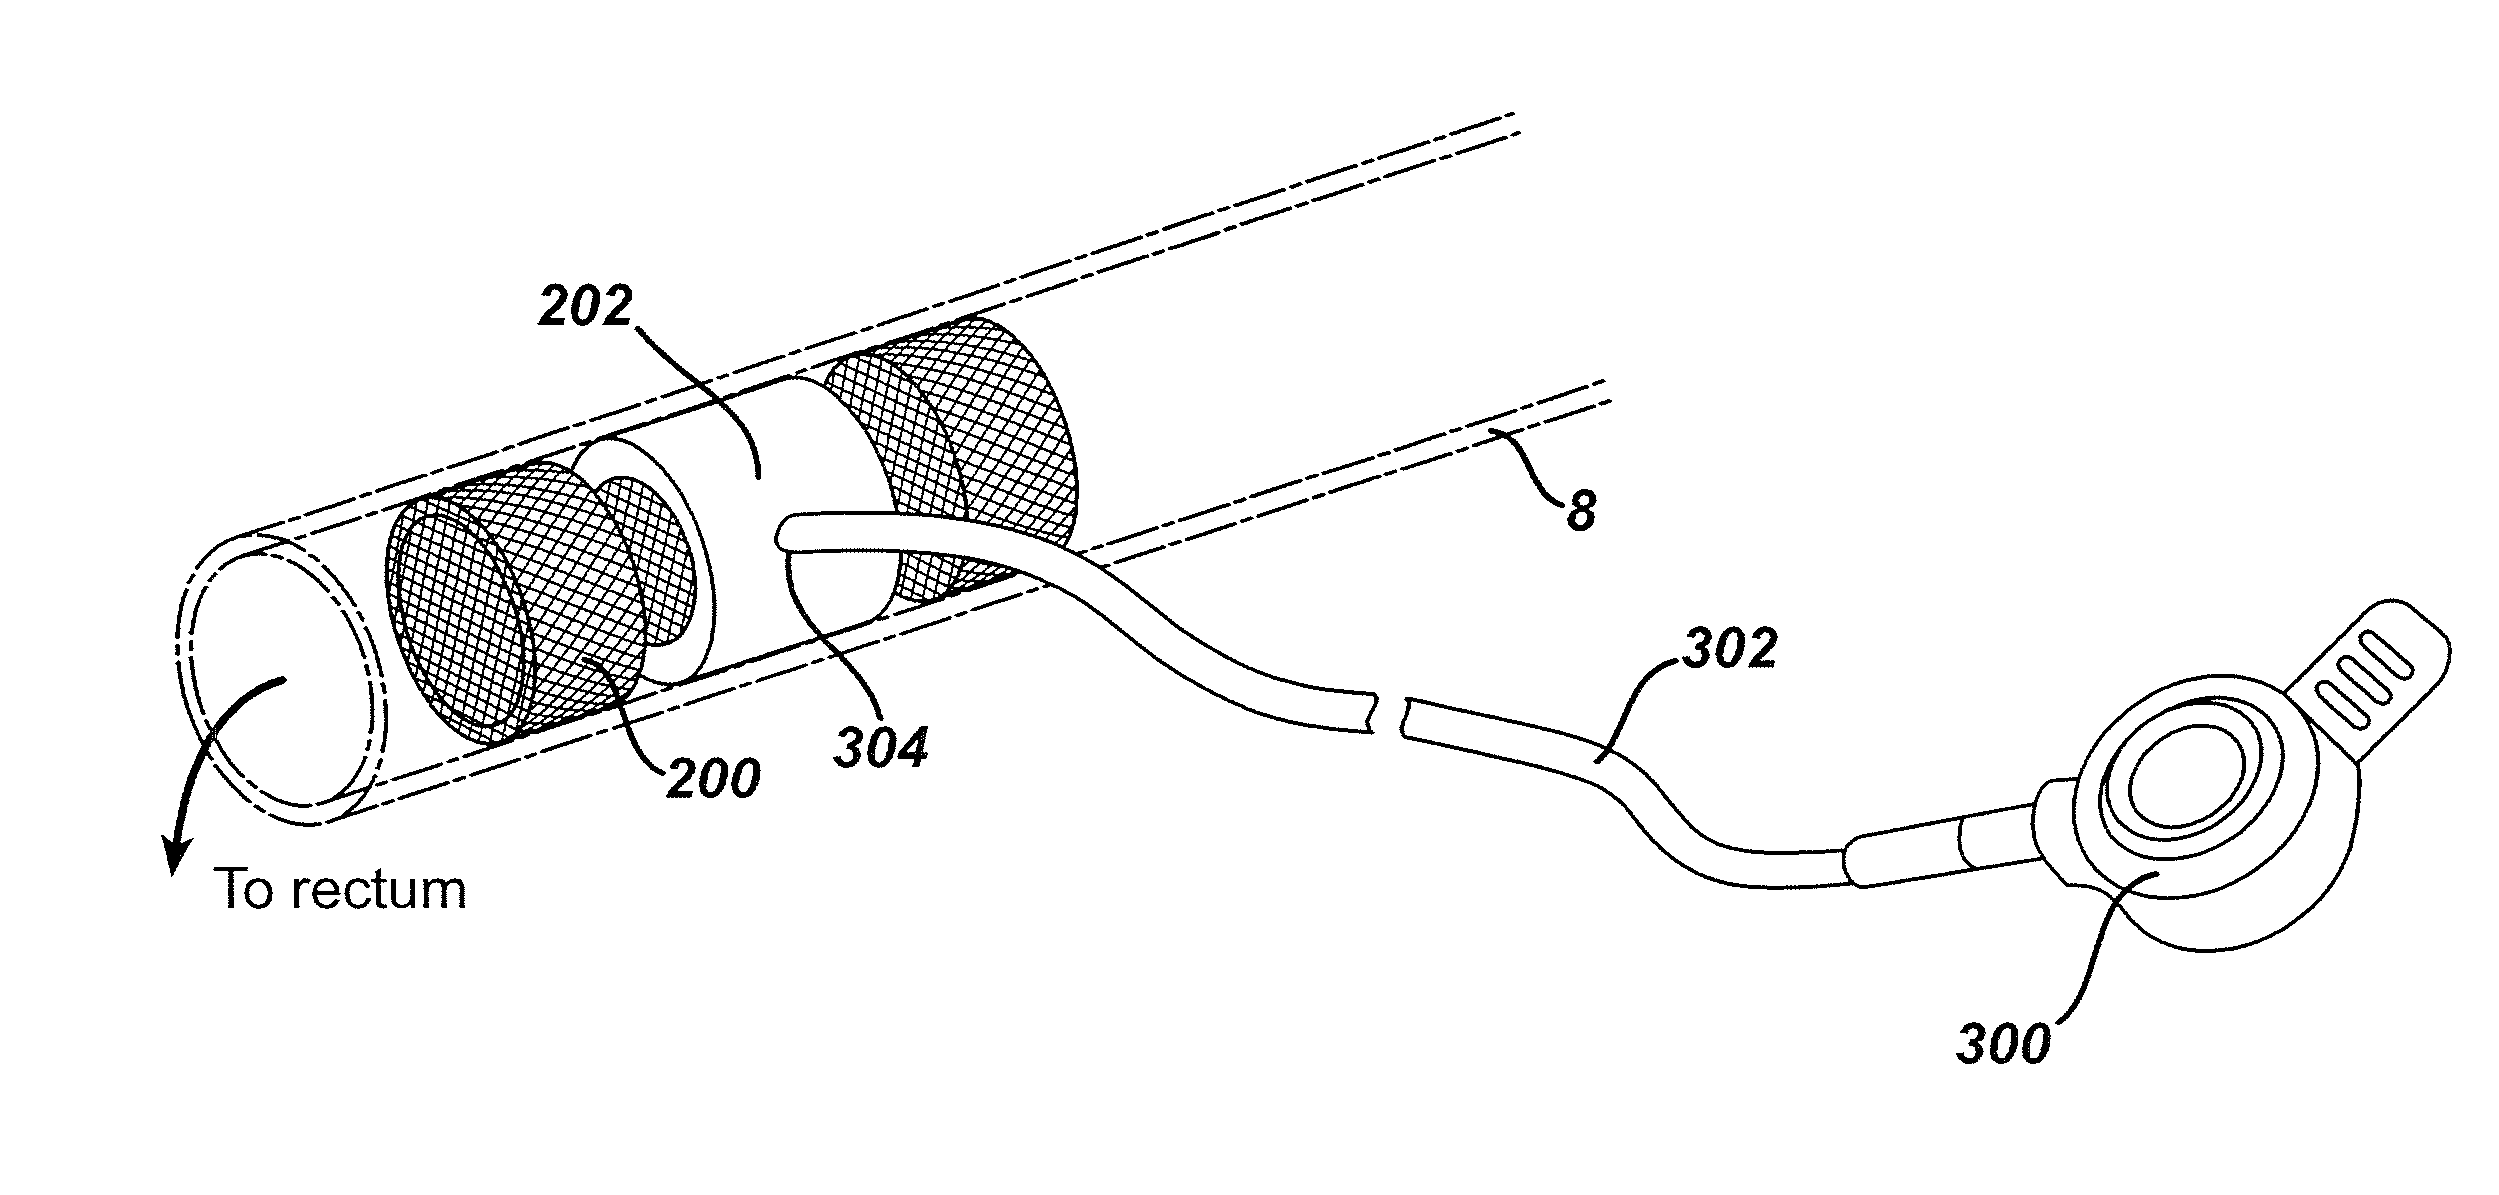 Intestinal brake inducing intraluminal therapeutic substance eluting devices and methods